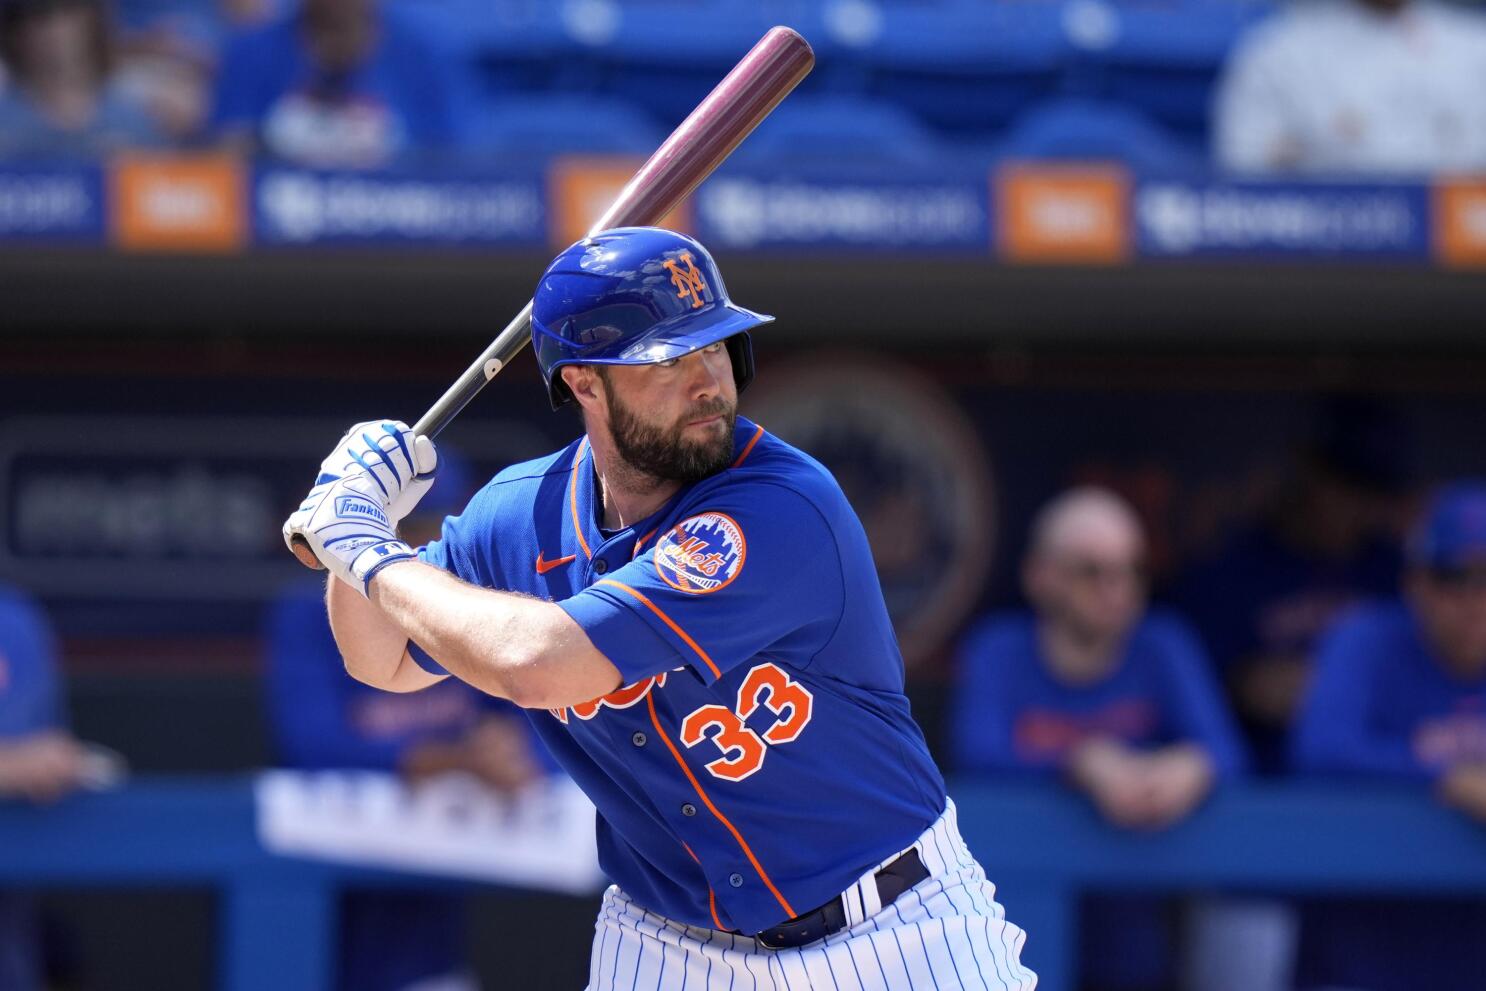 Mets news: Mets sign outfielder Tim Locastro to minor league